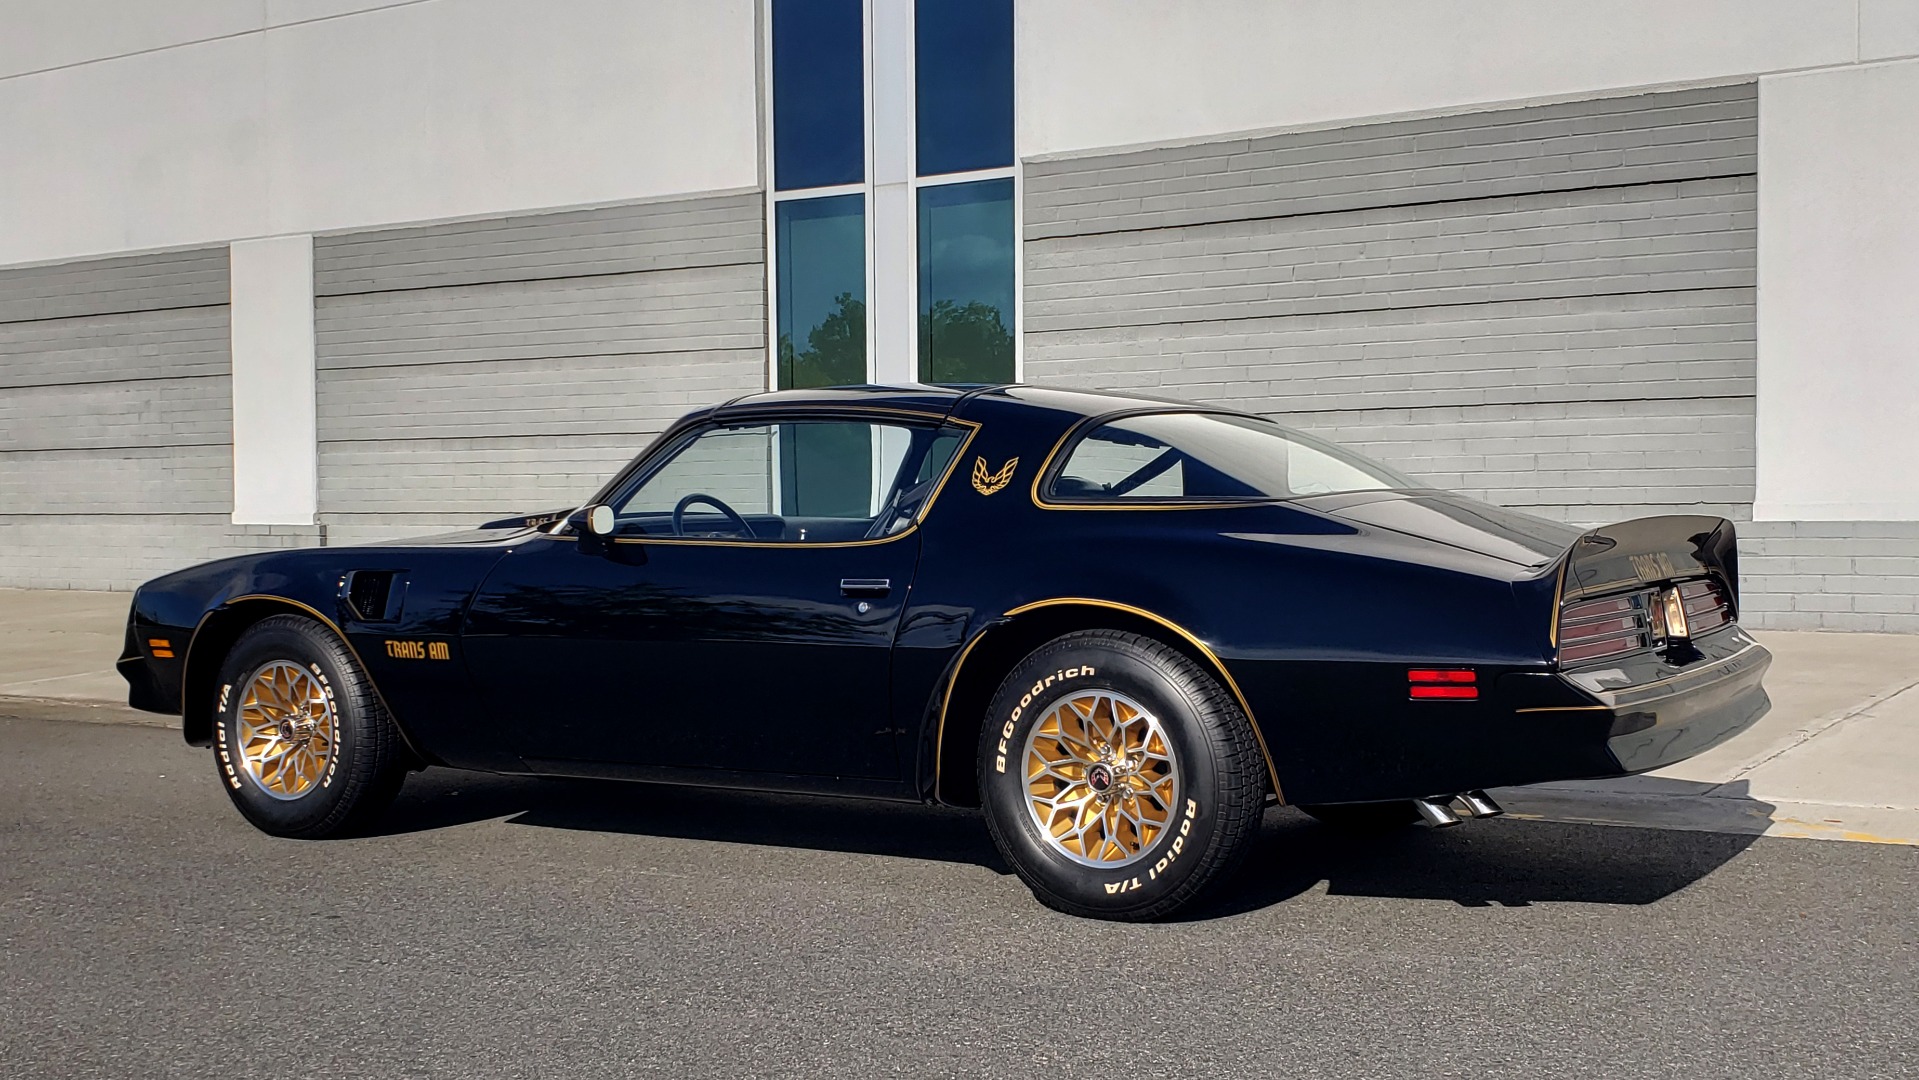 Used 1977 Pontiac TRANS AM Y82 SPECIAL EDITION BANDIT / 6.6L / 4-SPEED MANUAL / LOW MILES for sale Sold at Formula Imports in Charlotte NC 28227 8